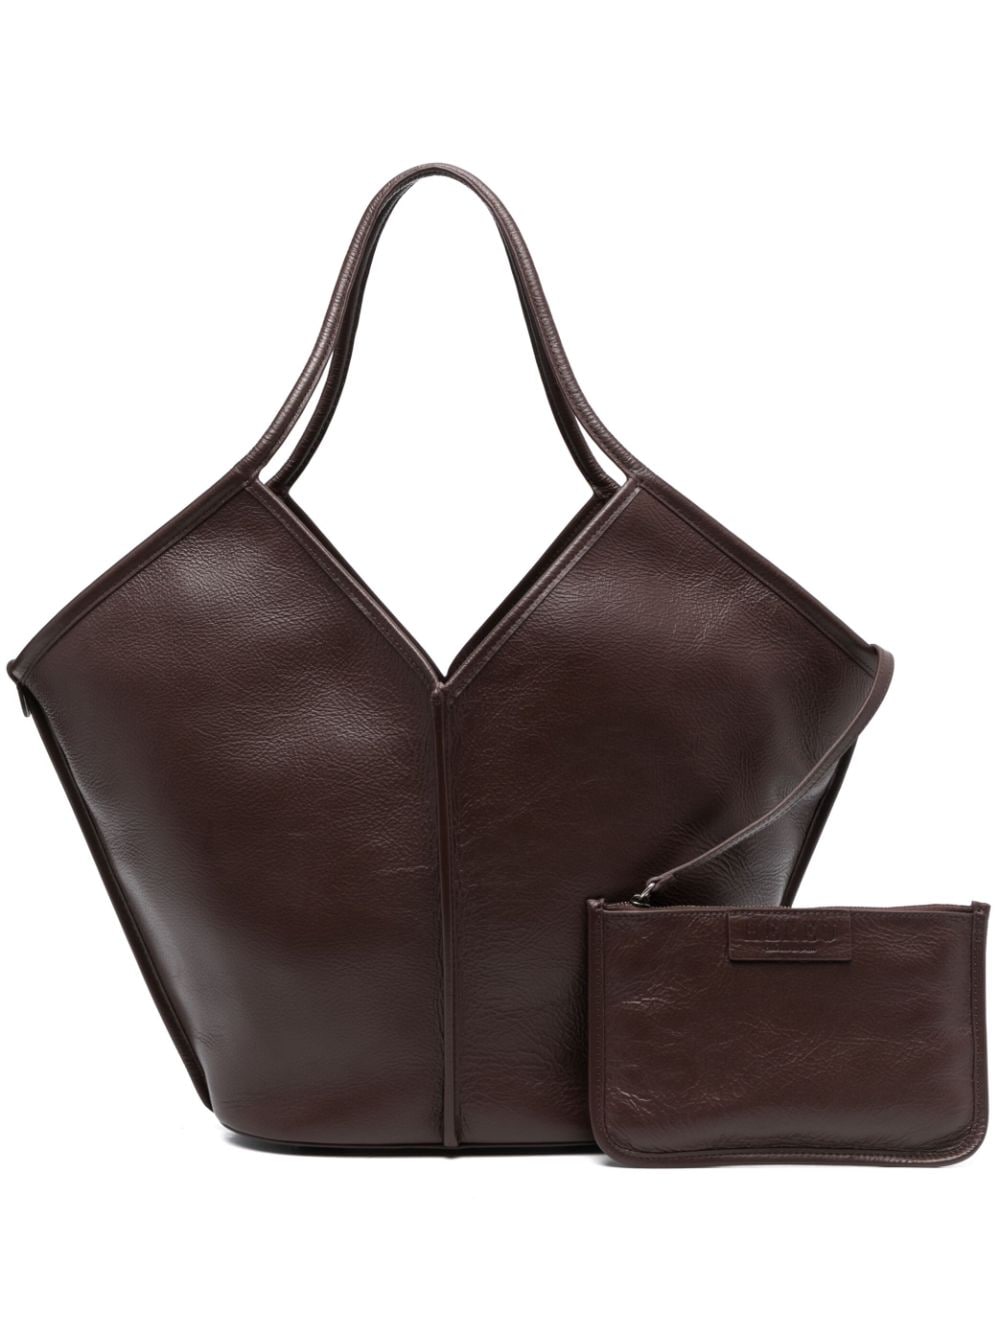 Chestnut Cabas Mini Straw Tote by Hereu for $73